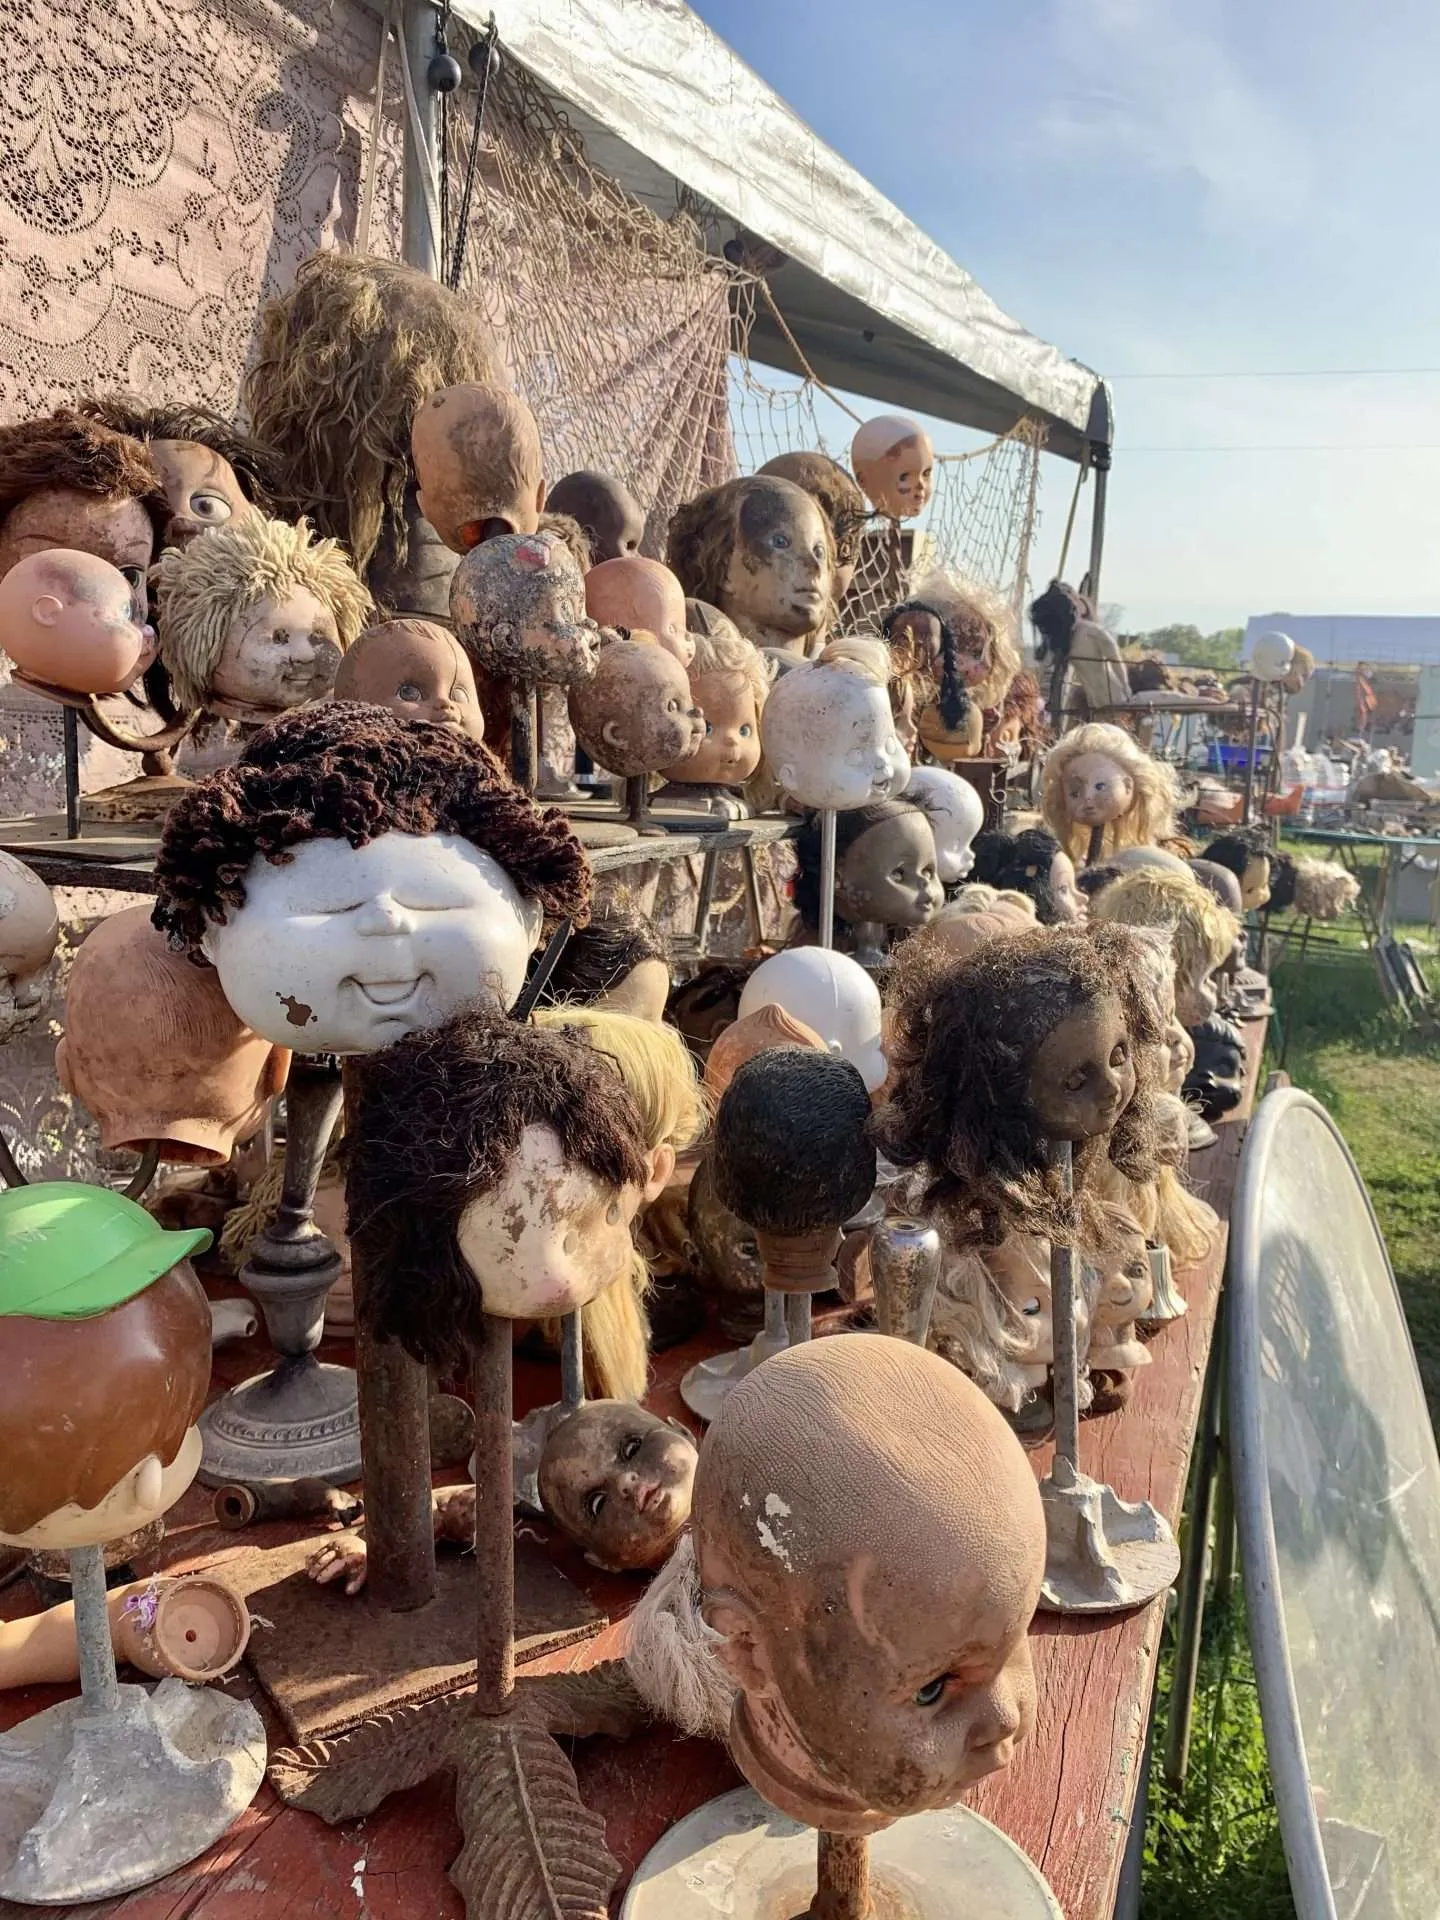 Creepy baby doll heads on sticks at the Round Top Antique Show.